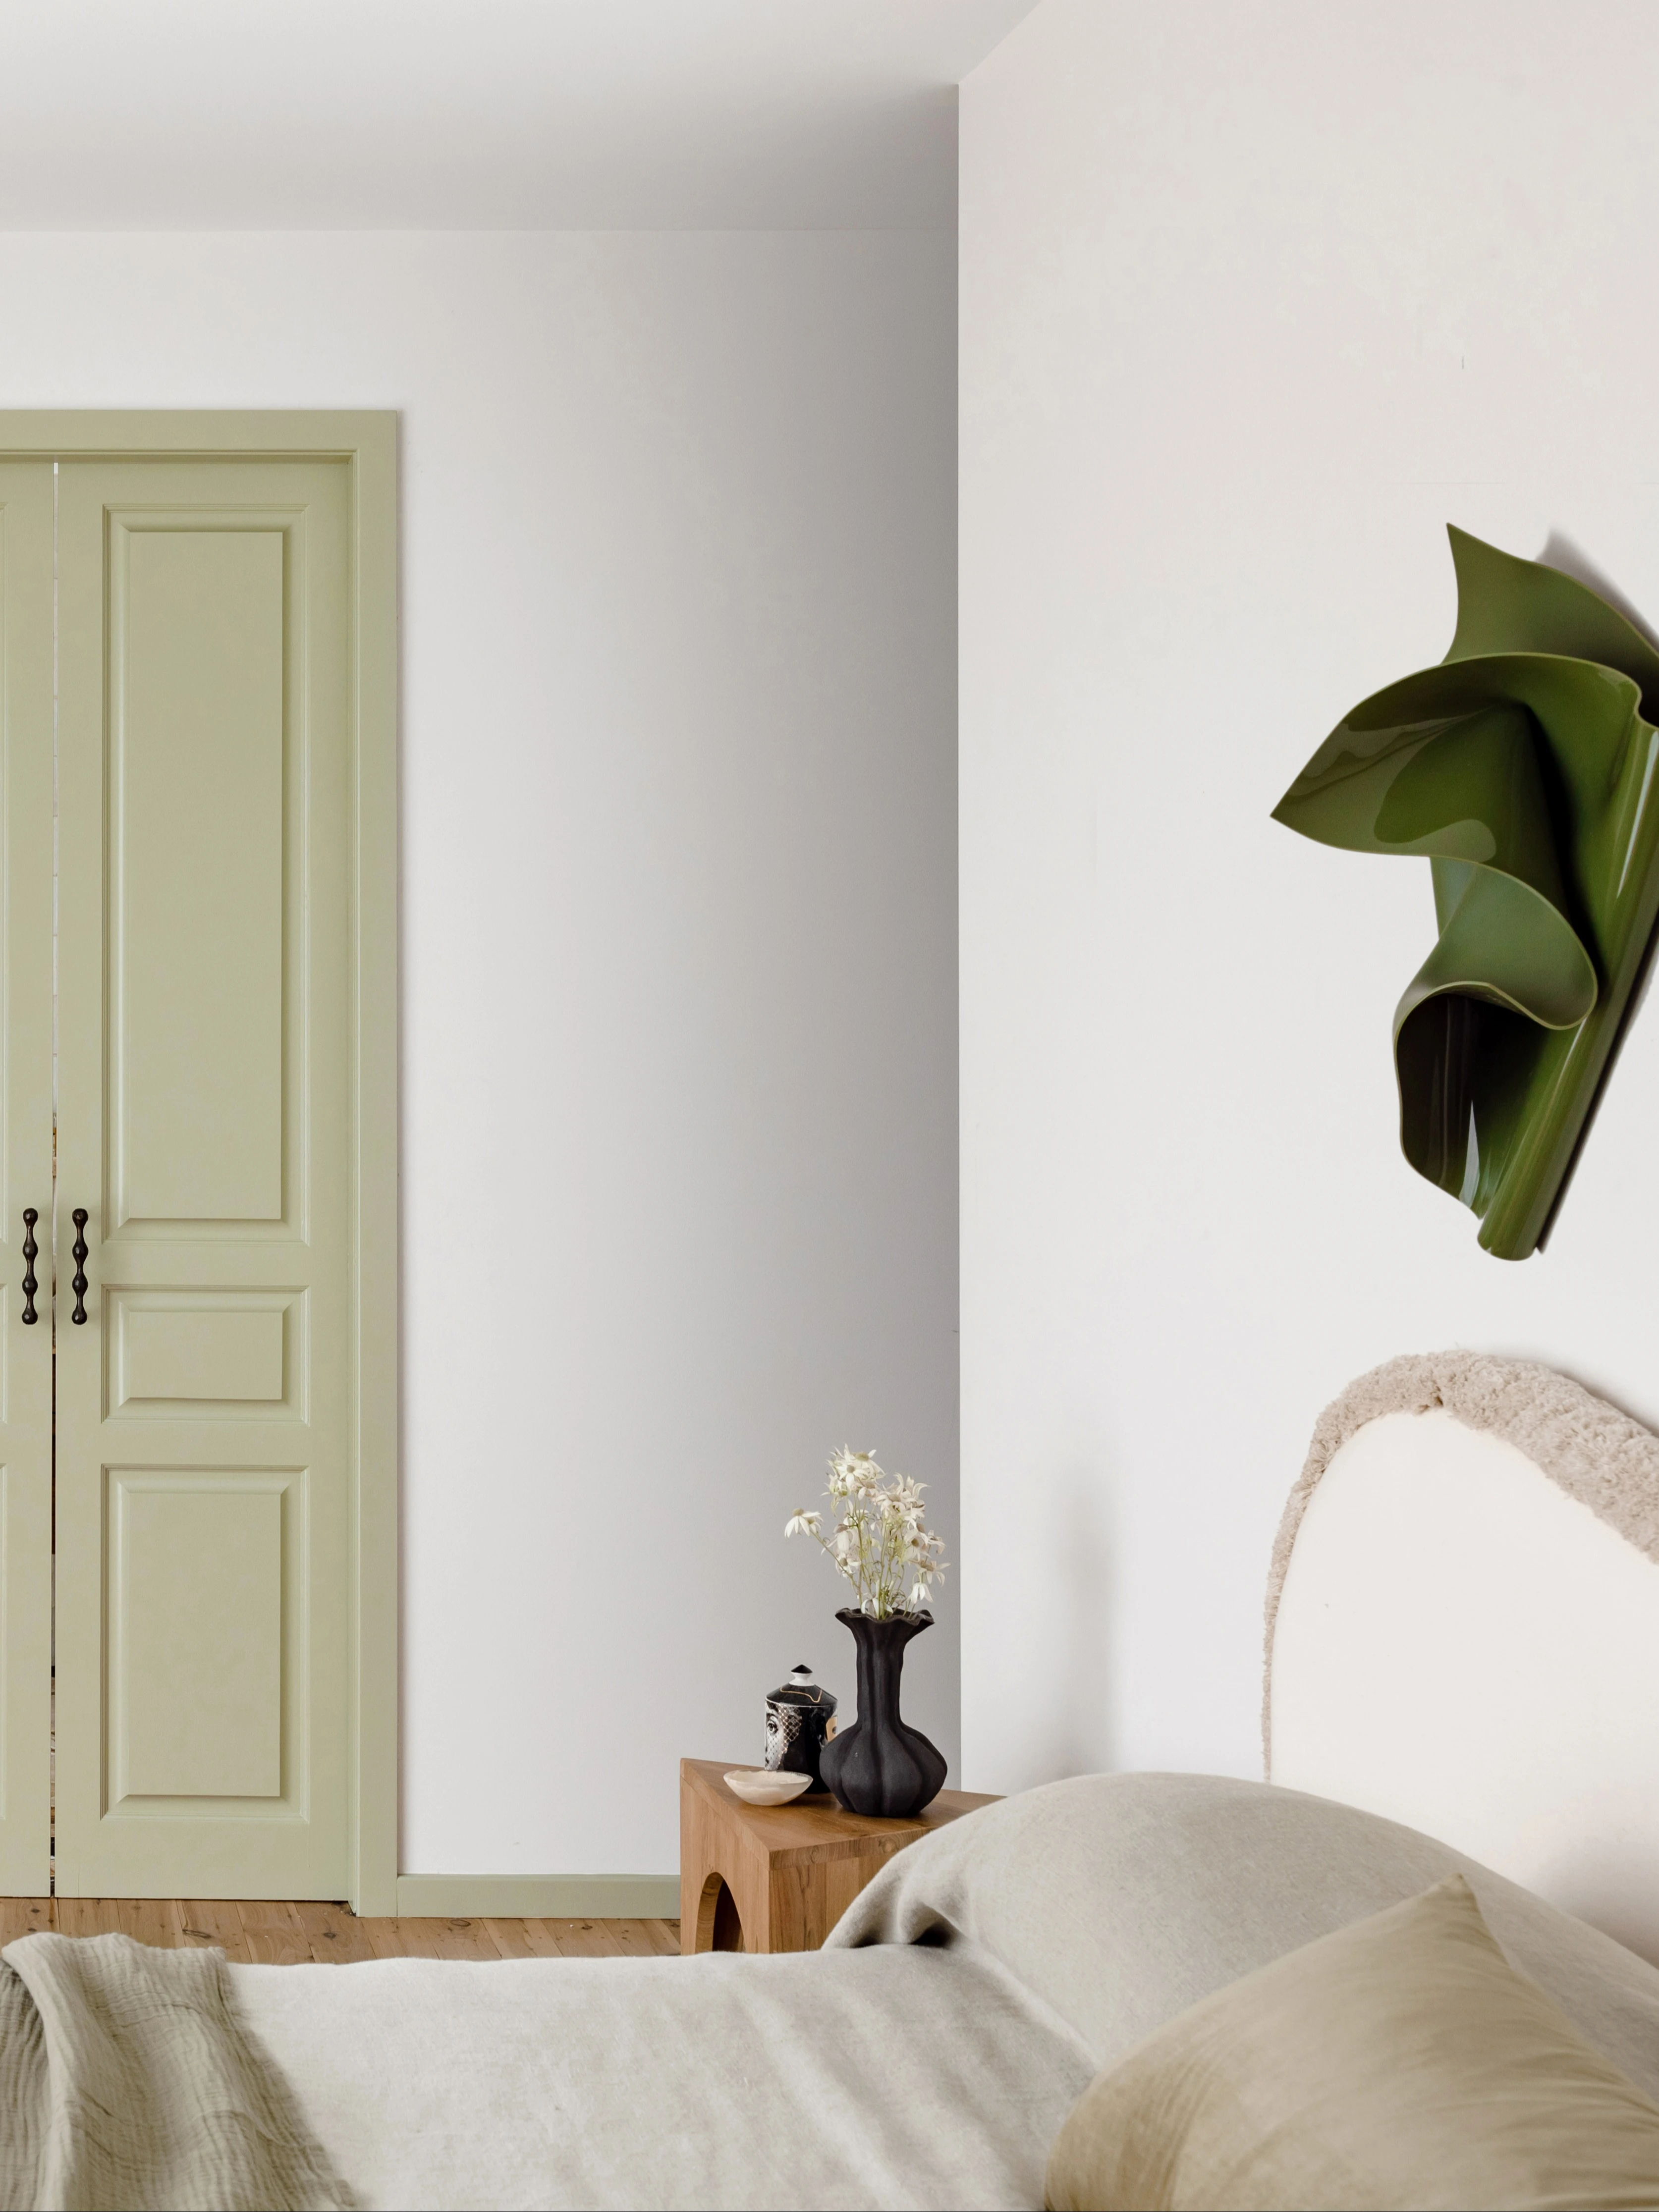 White bedroom with green door and green wall art